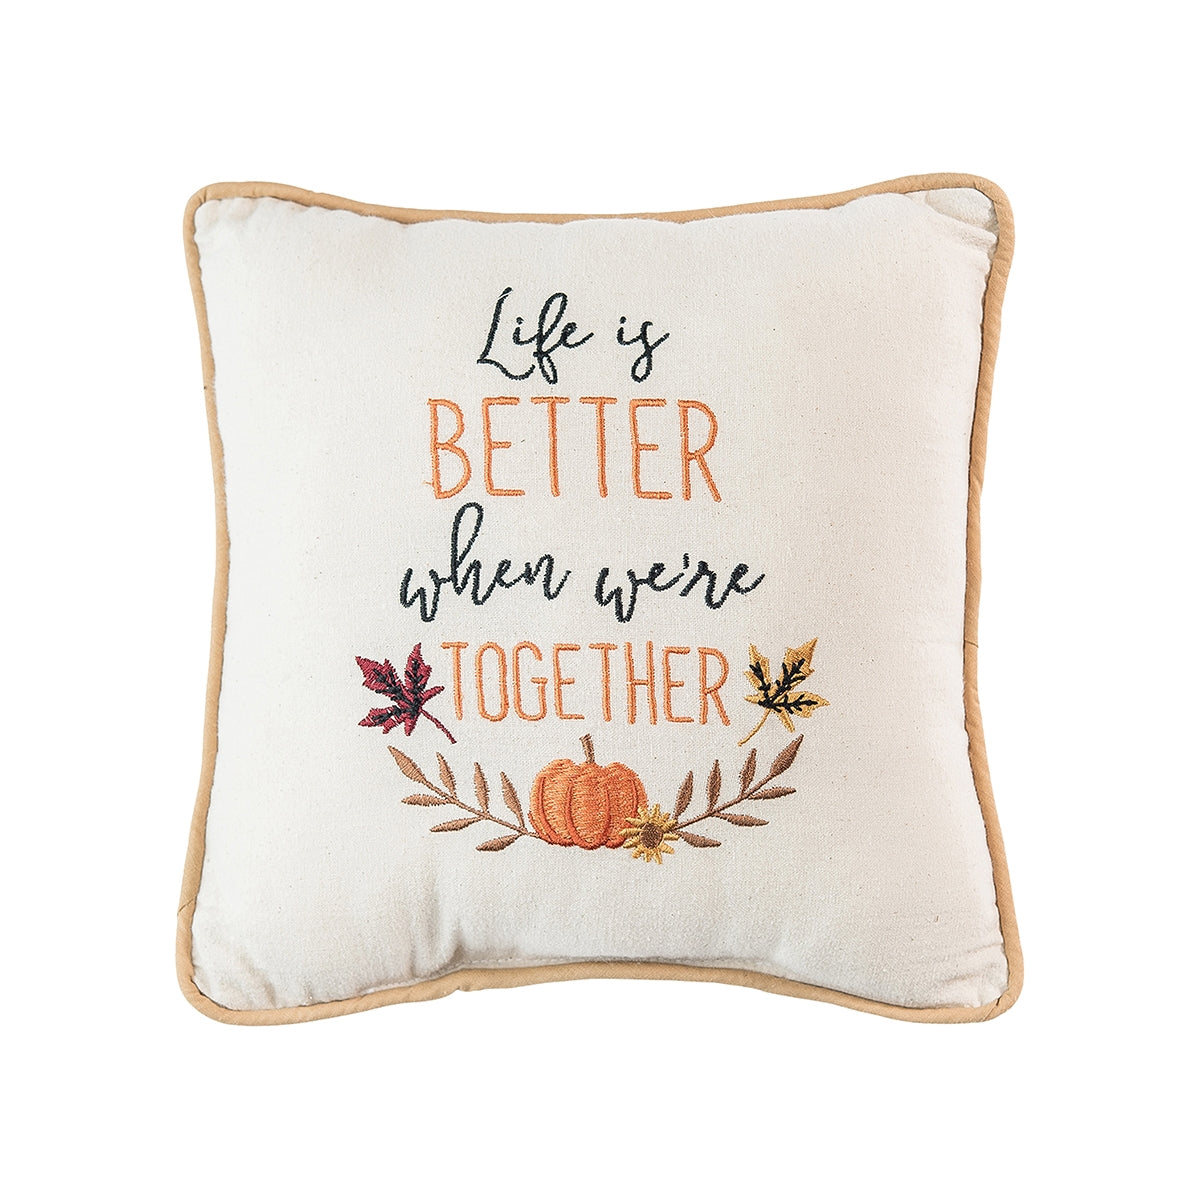 Life Is Better When We're Together - 10x10 Inch Pillow    